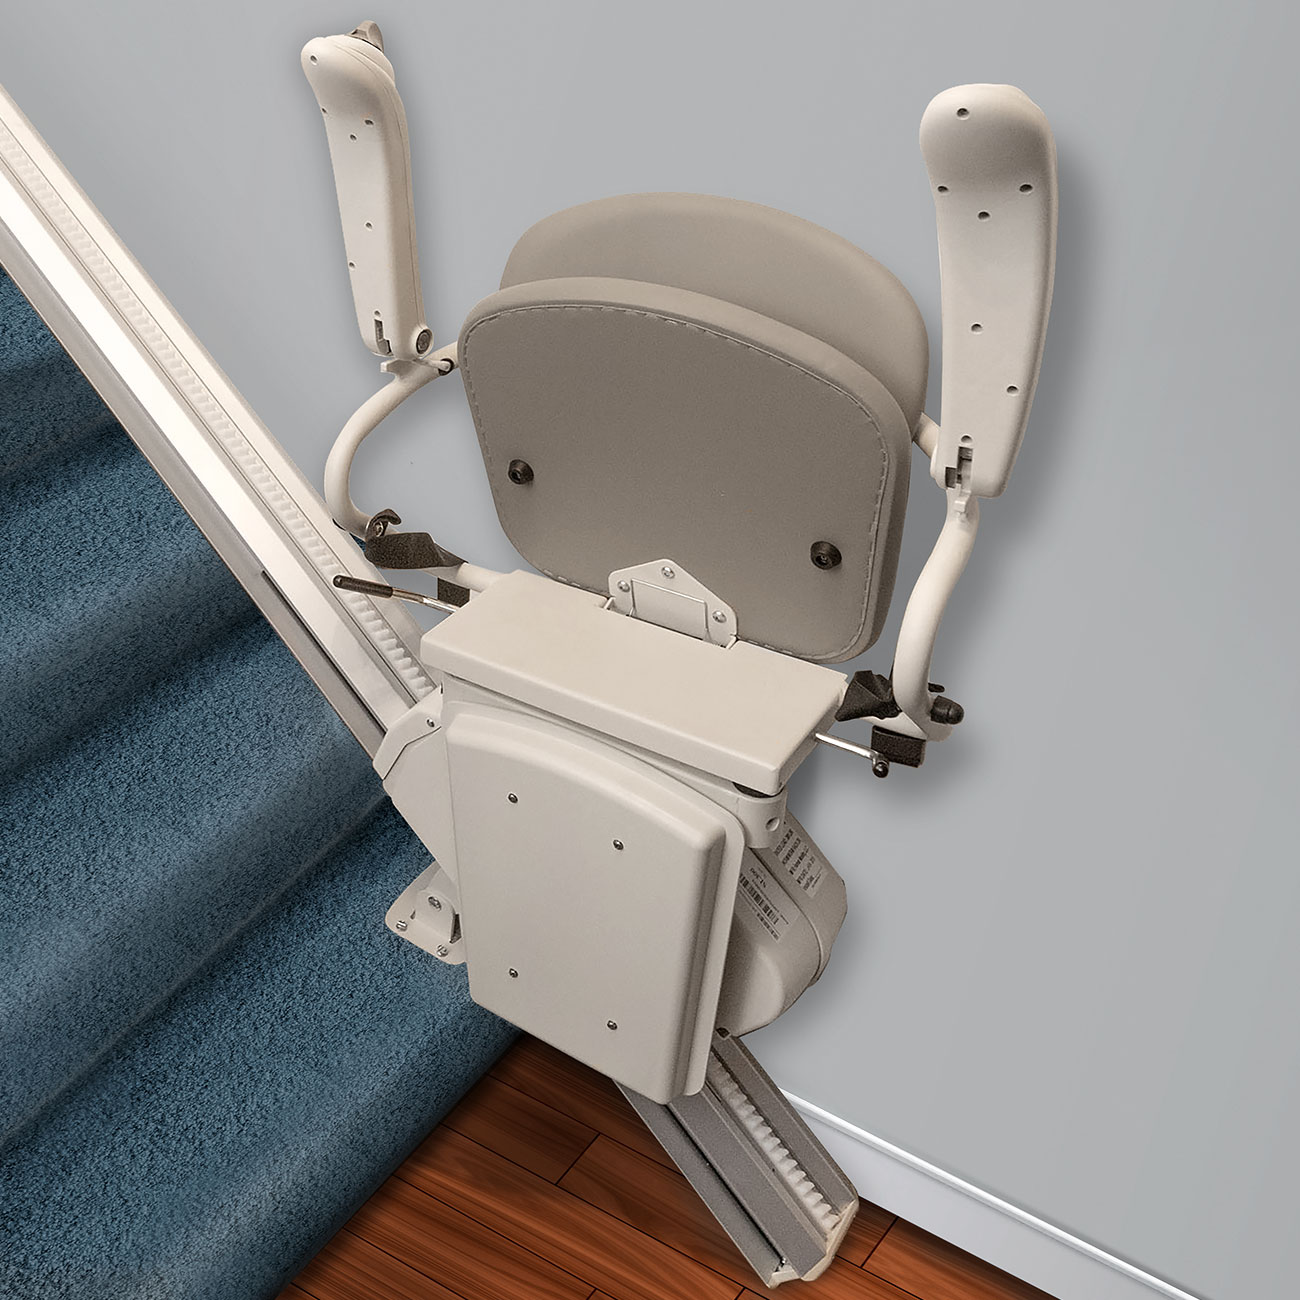 Photo visualizing the most compact configuration of Leaf Home Safety Solution's stair-lift setup